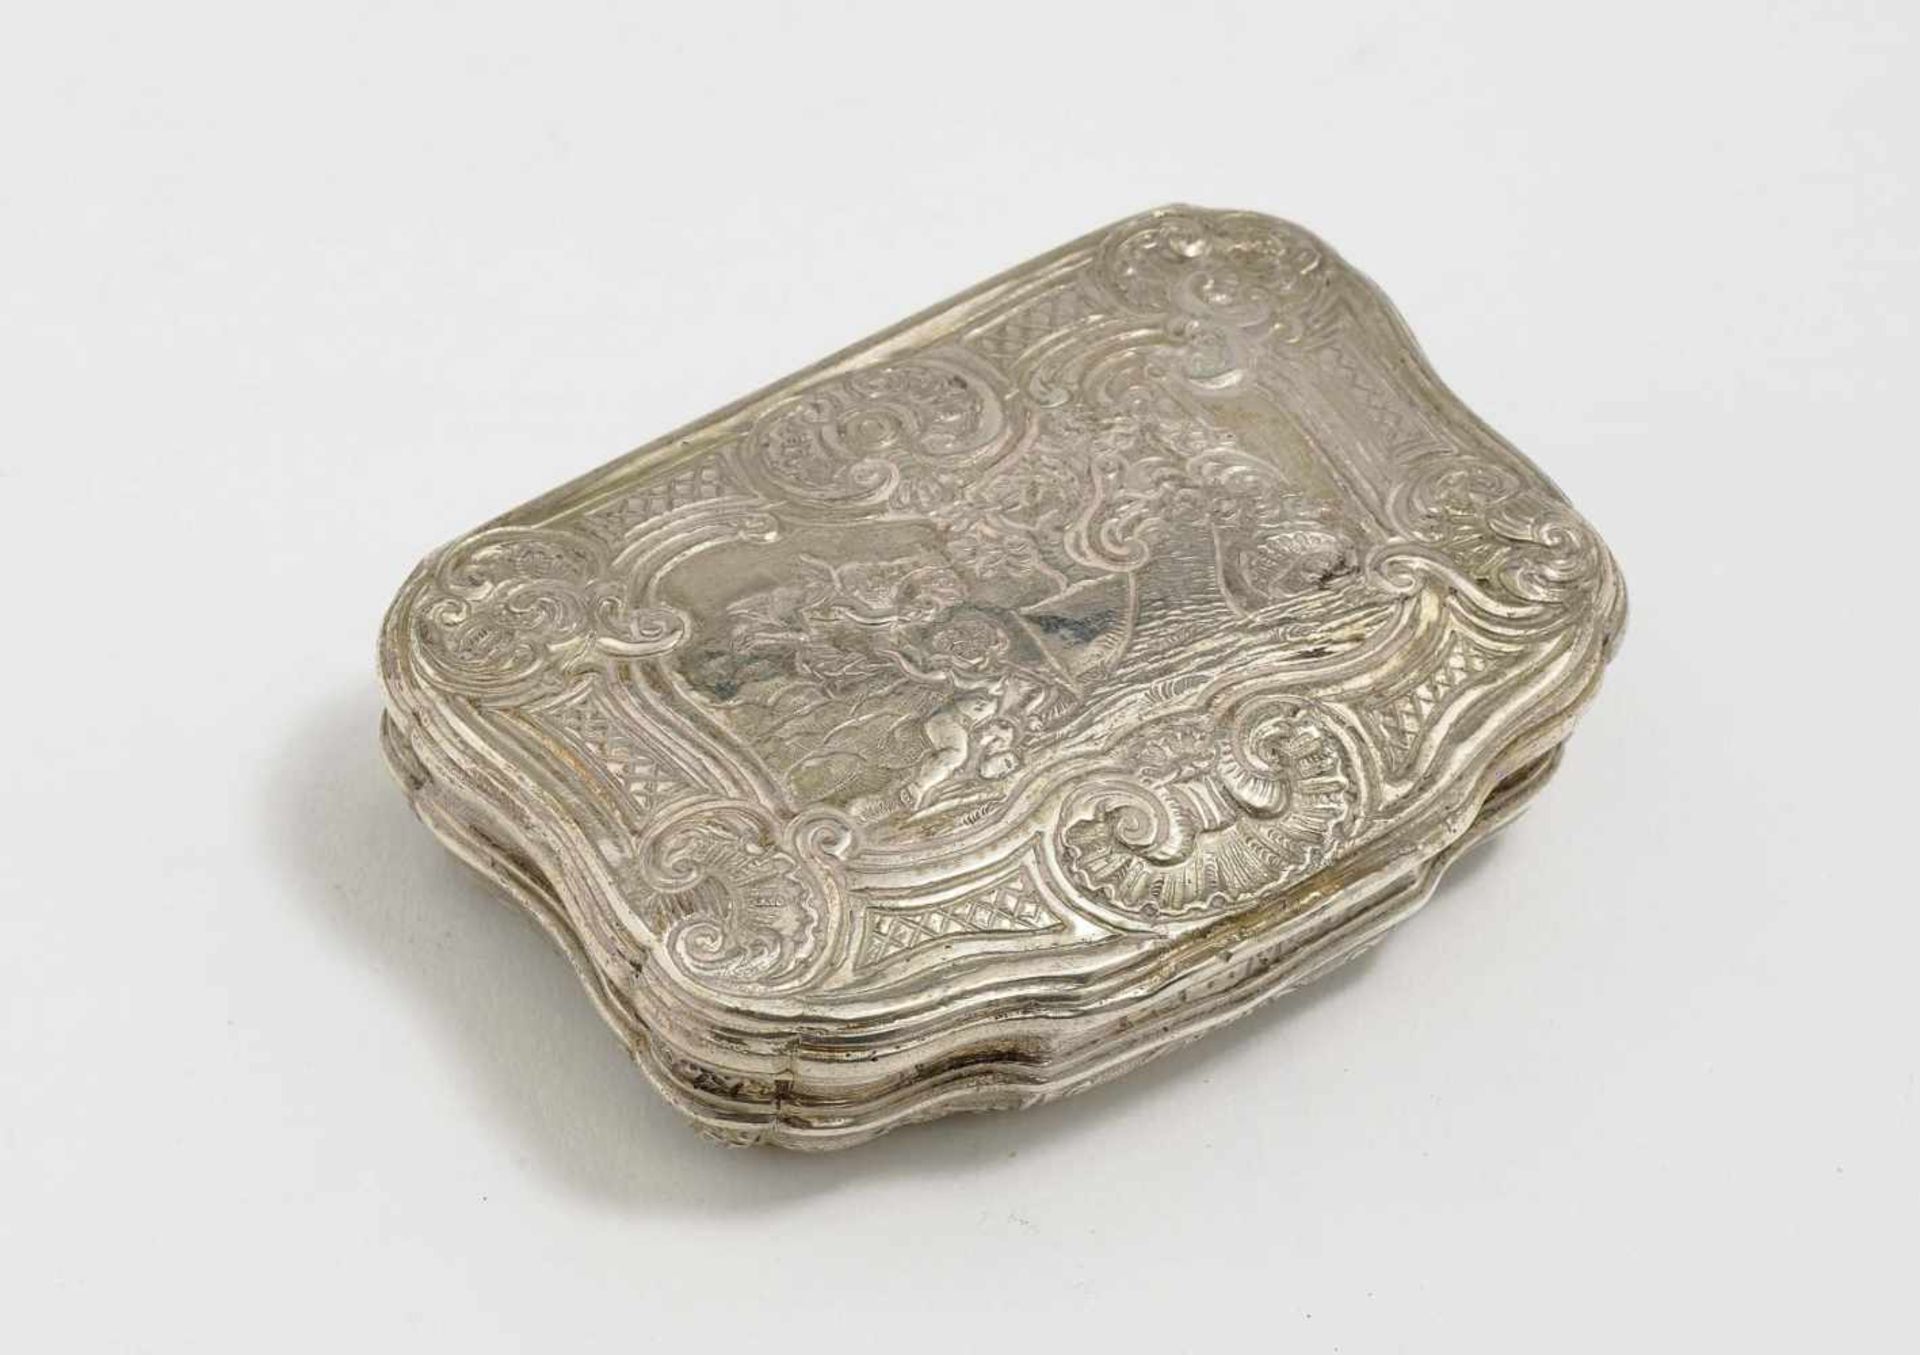 A Snuff Box18th Century Silver, gilt interior. Hammered, chased and embossed decoration. Not